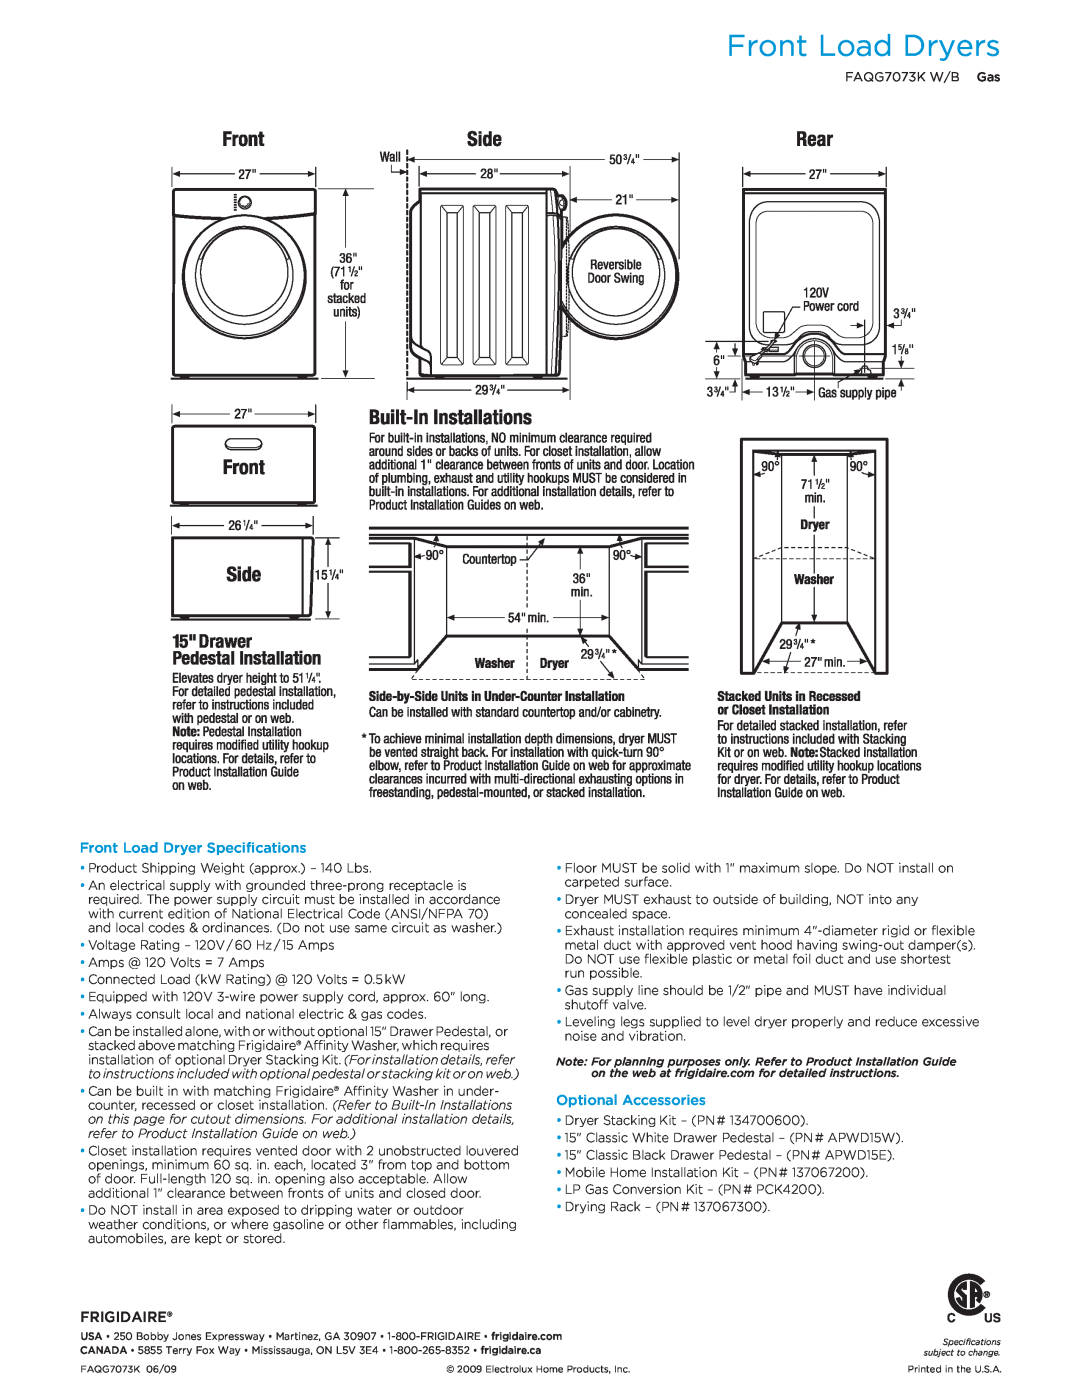 Frigidaire FAQG7073K W/B dimensions Front Load Dryer Specifications, Optional Accessories, Frigidaire, Front Load Dryers 